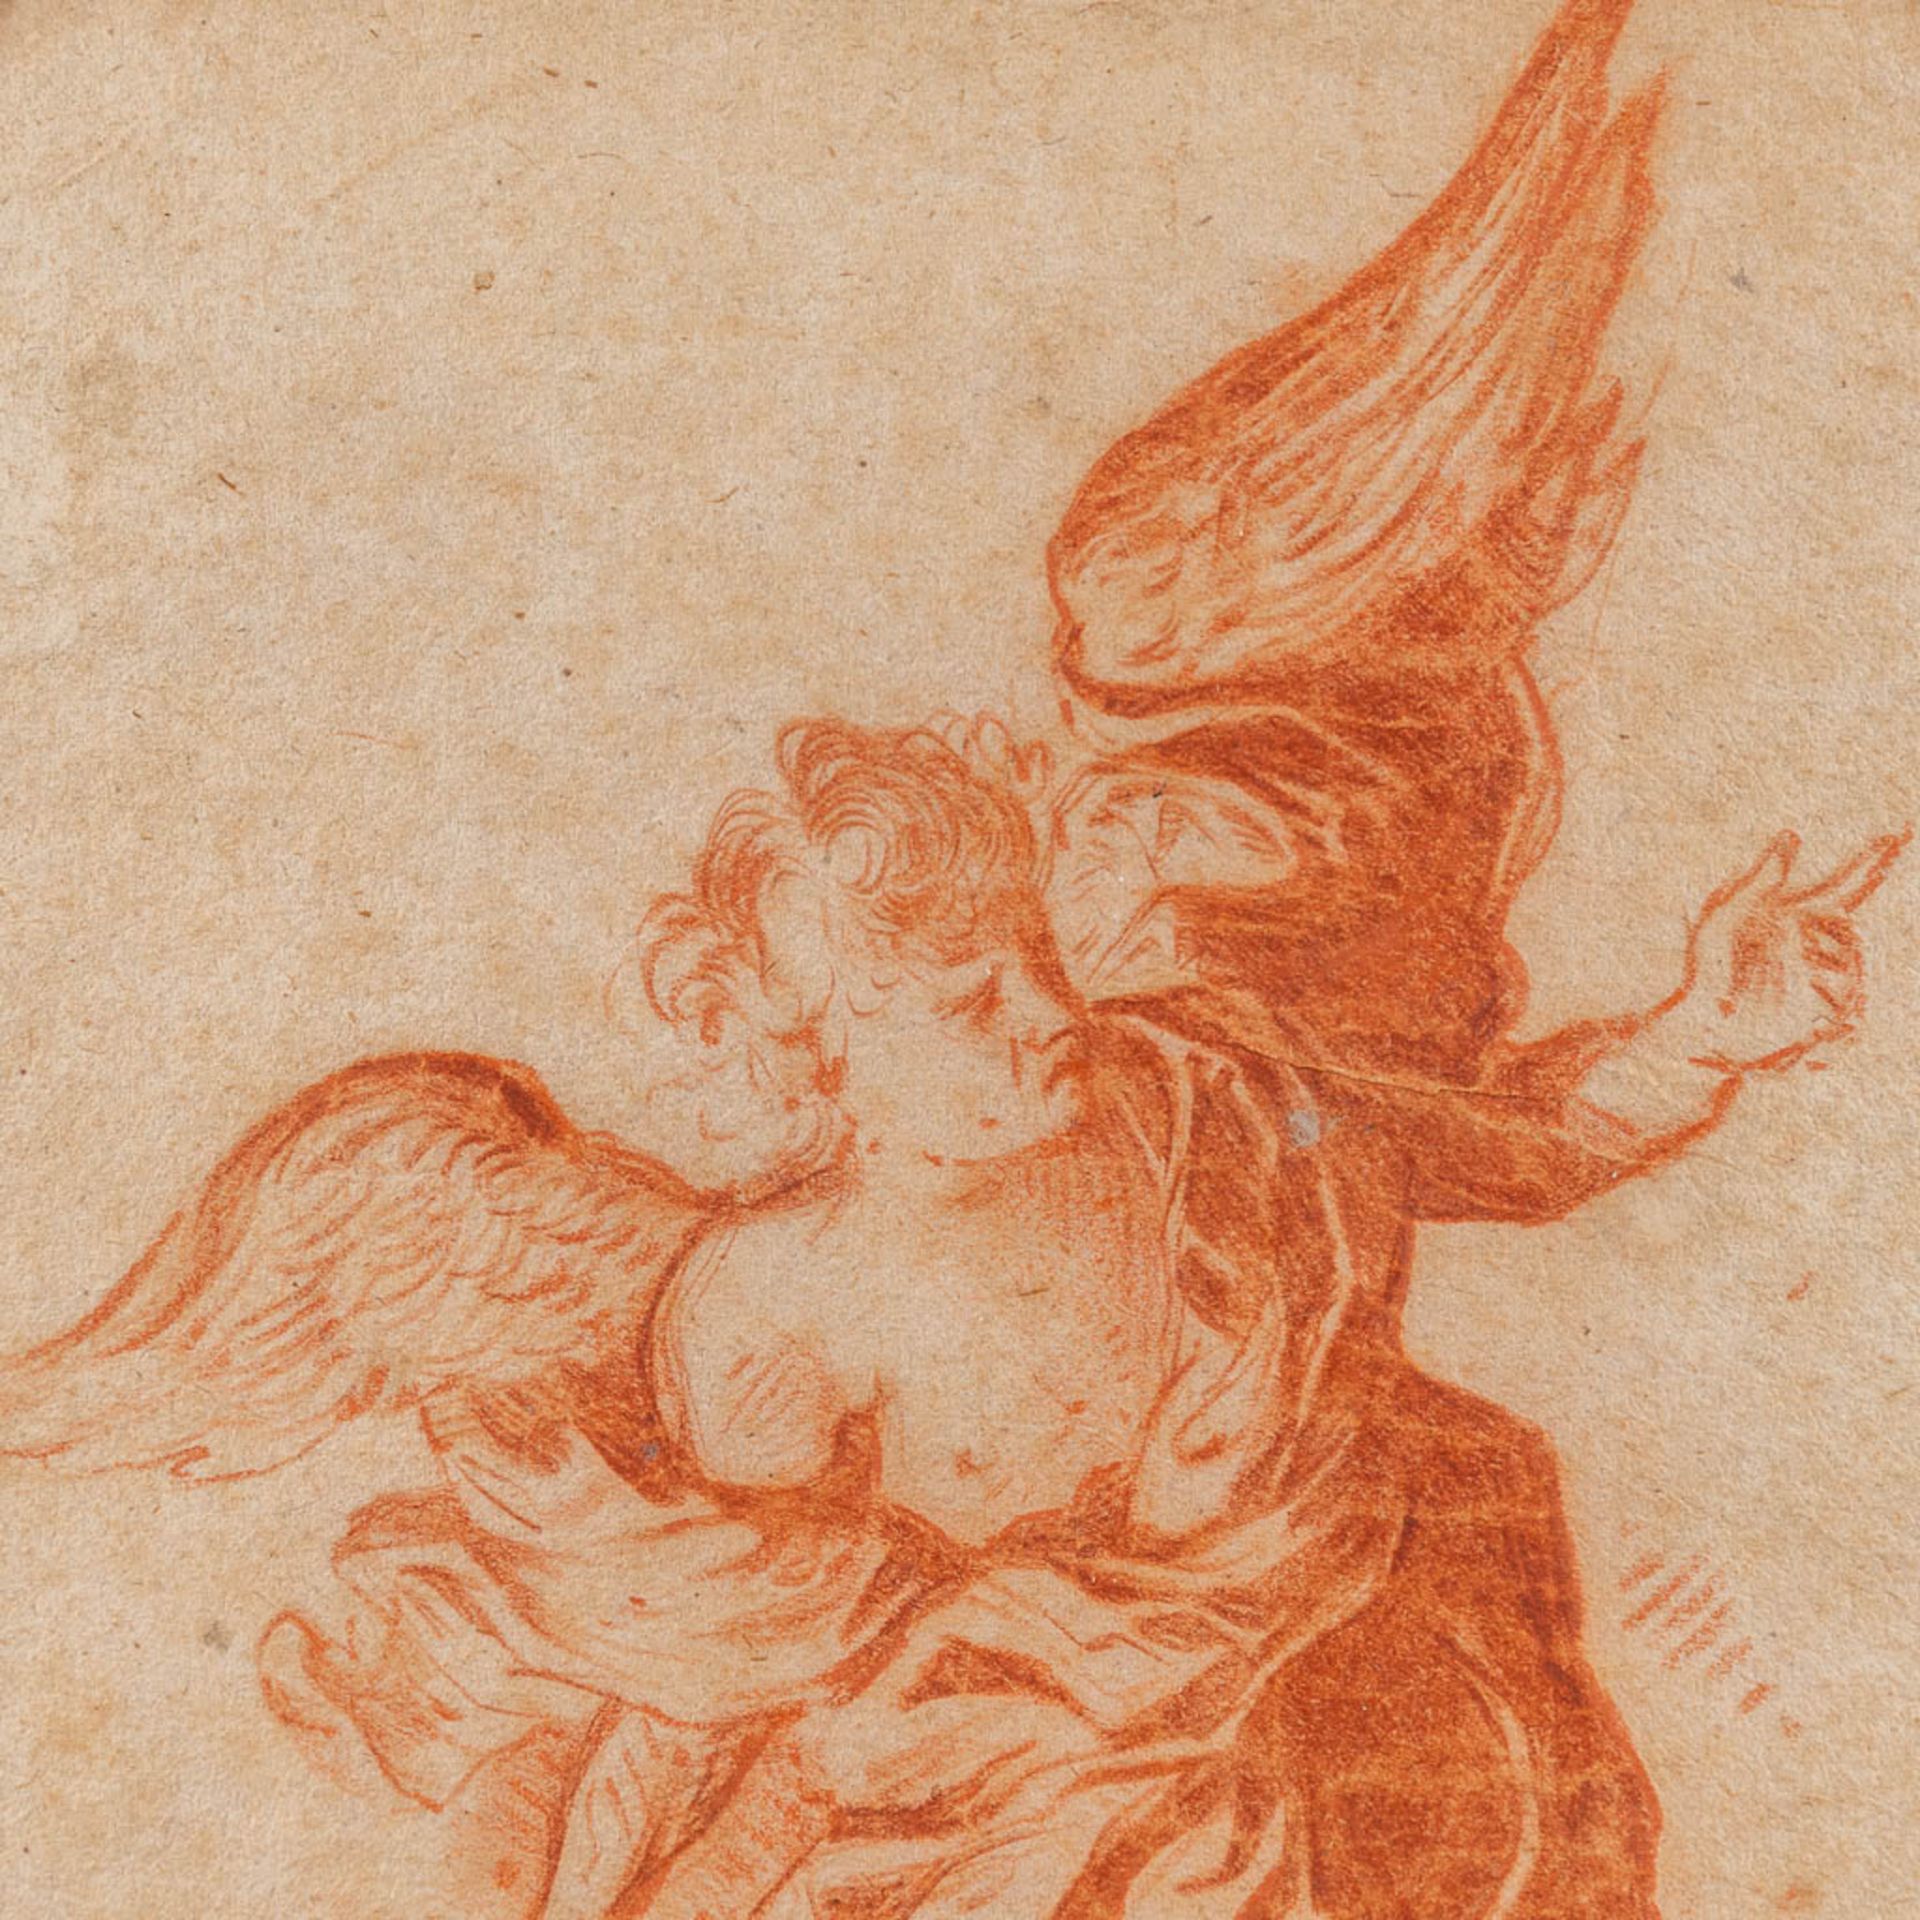 Study of an angel, a drawing, pencil on paper. 17th C. (W: 15 x H: 20 cm) - Image 4 of 5